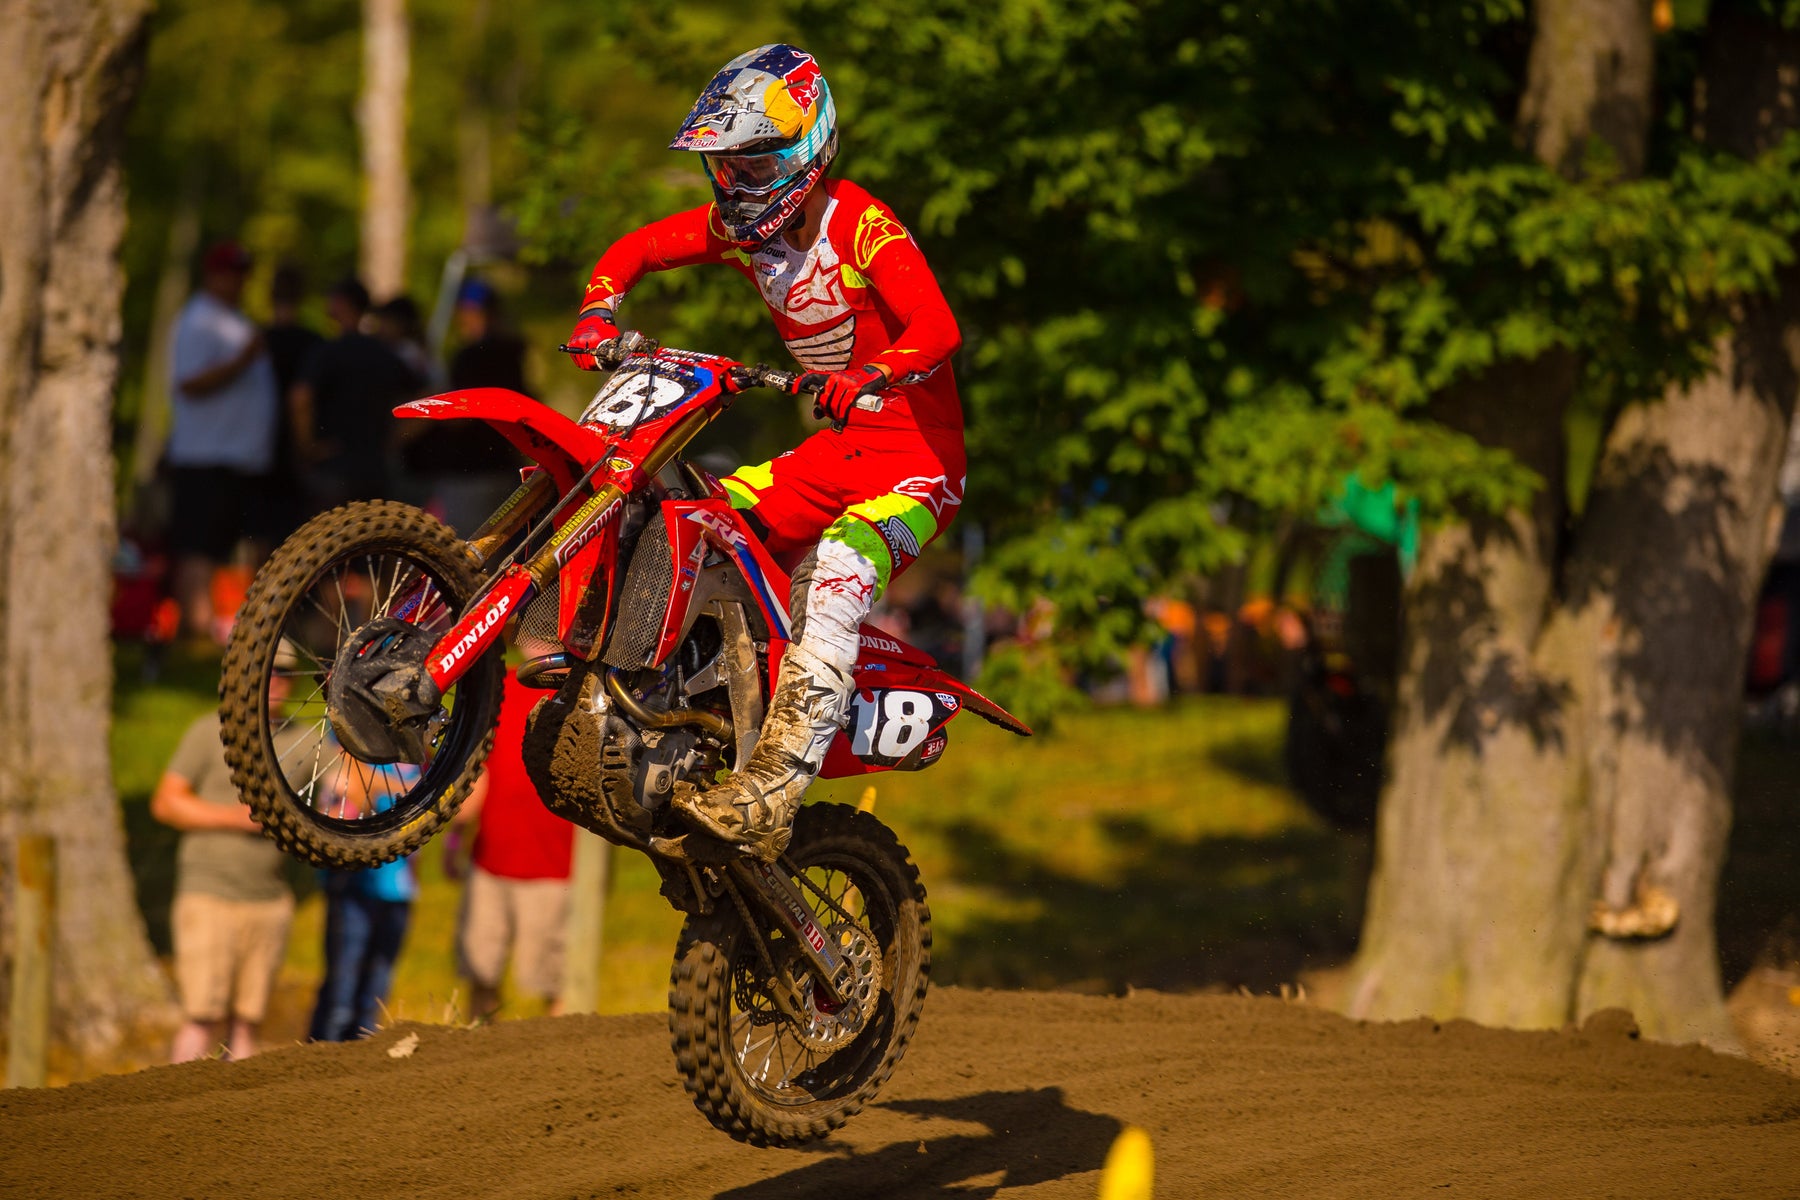 JETT LAWRENCE WINS IRONMAN 250MX RACES TO TAKE CHARGE OF CHAMPIONSHIP; JUSTIN COOPER SECOND